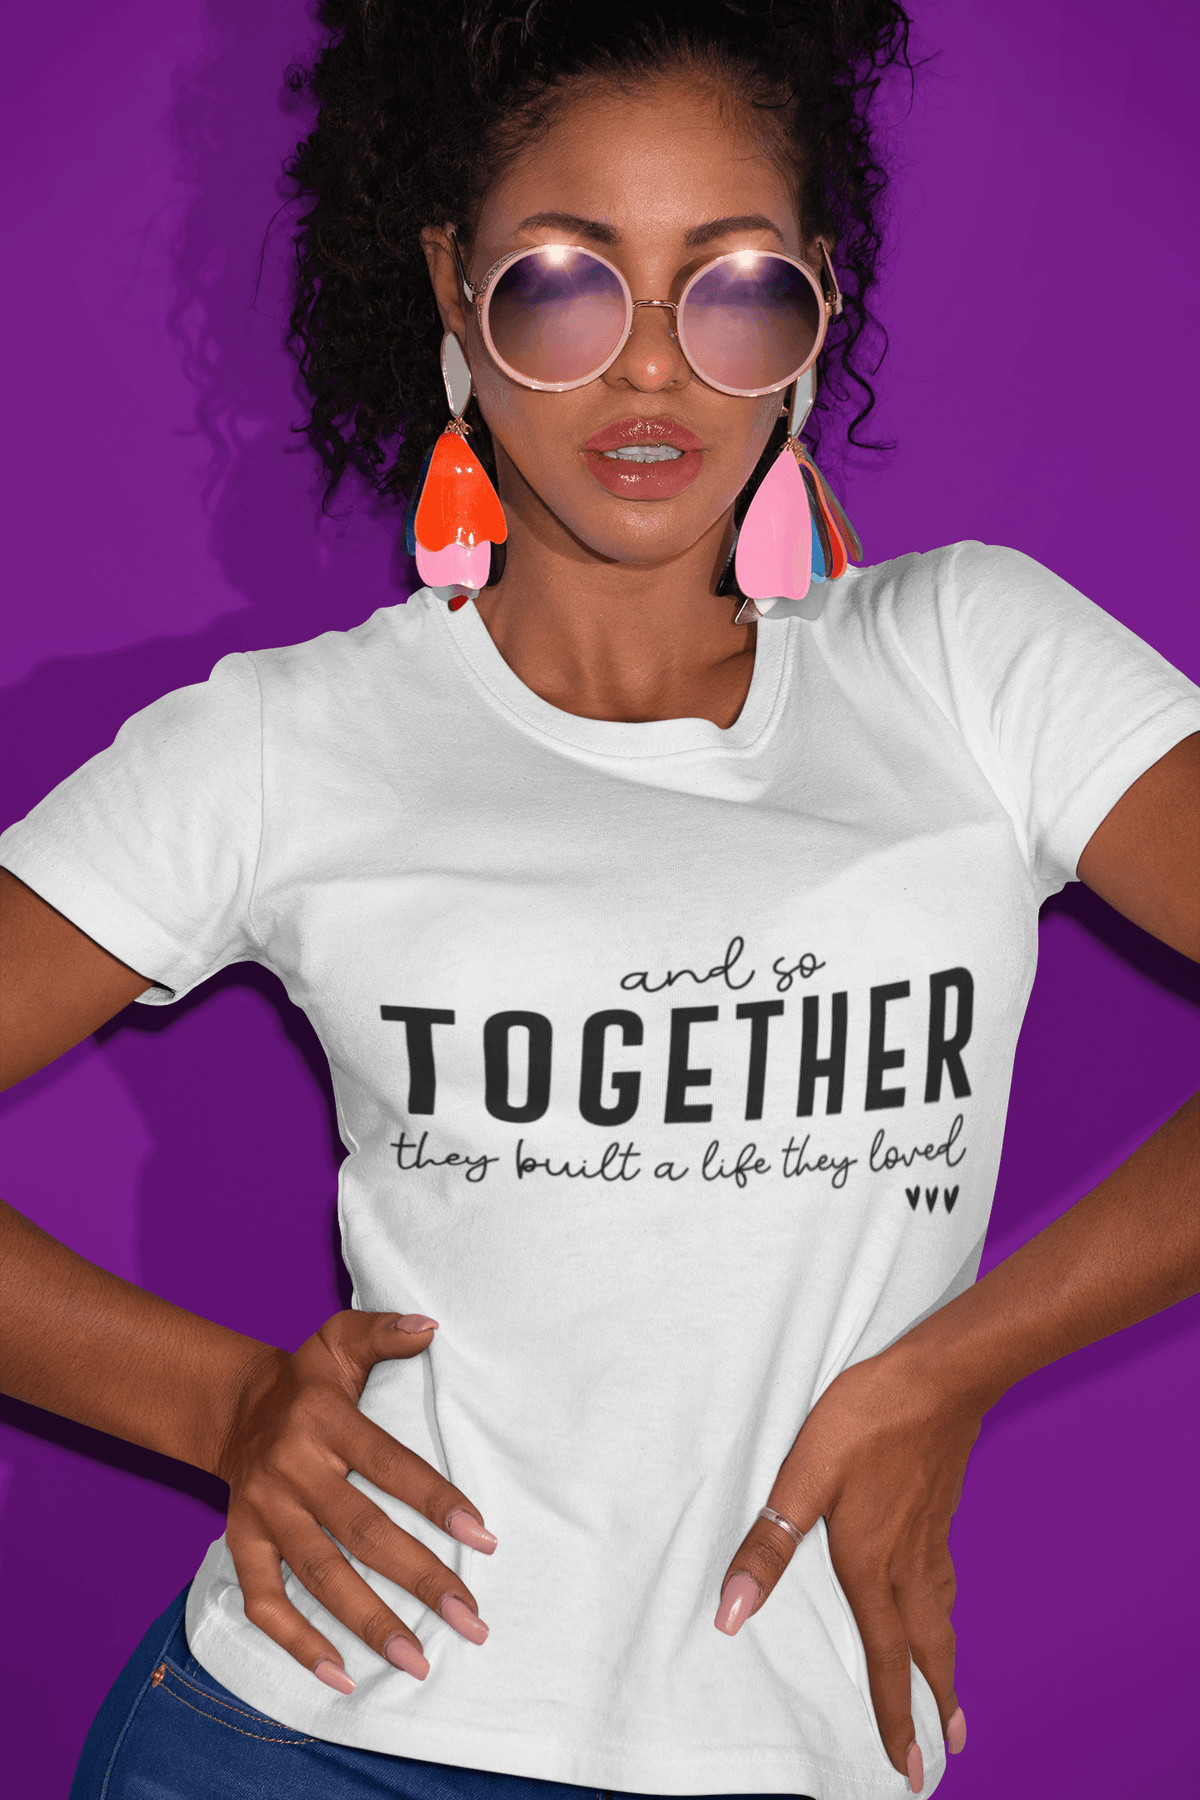 TOGETHER T-shirt-Regular Fit Tee-StylinArts